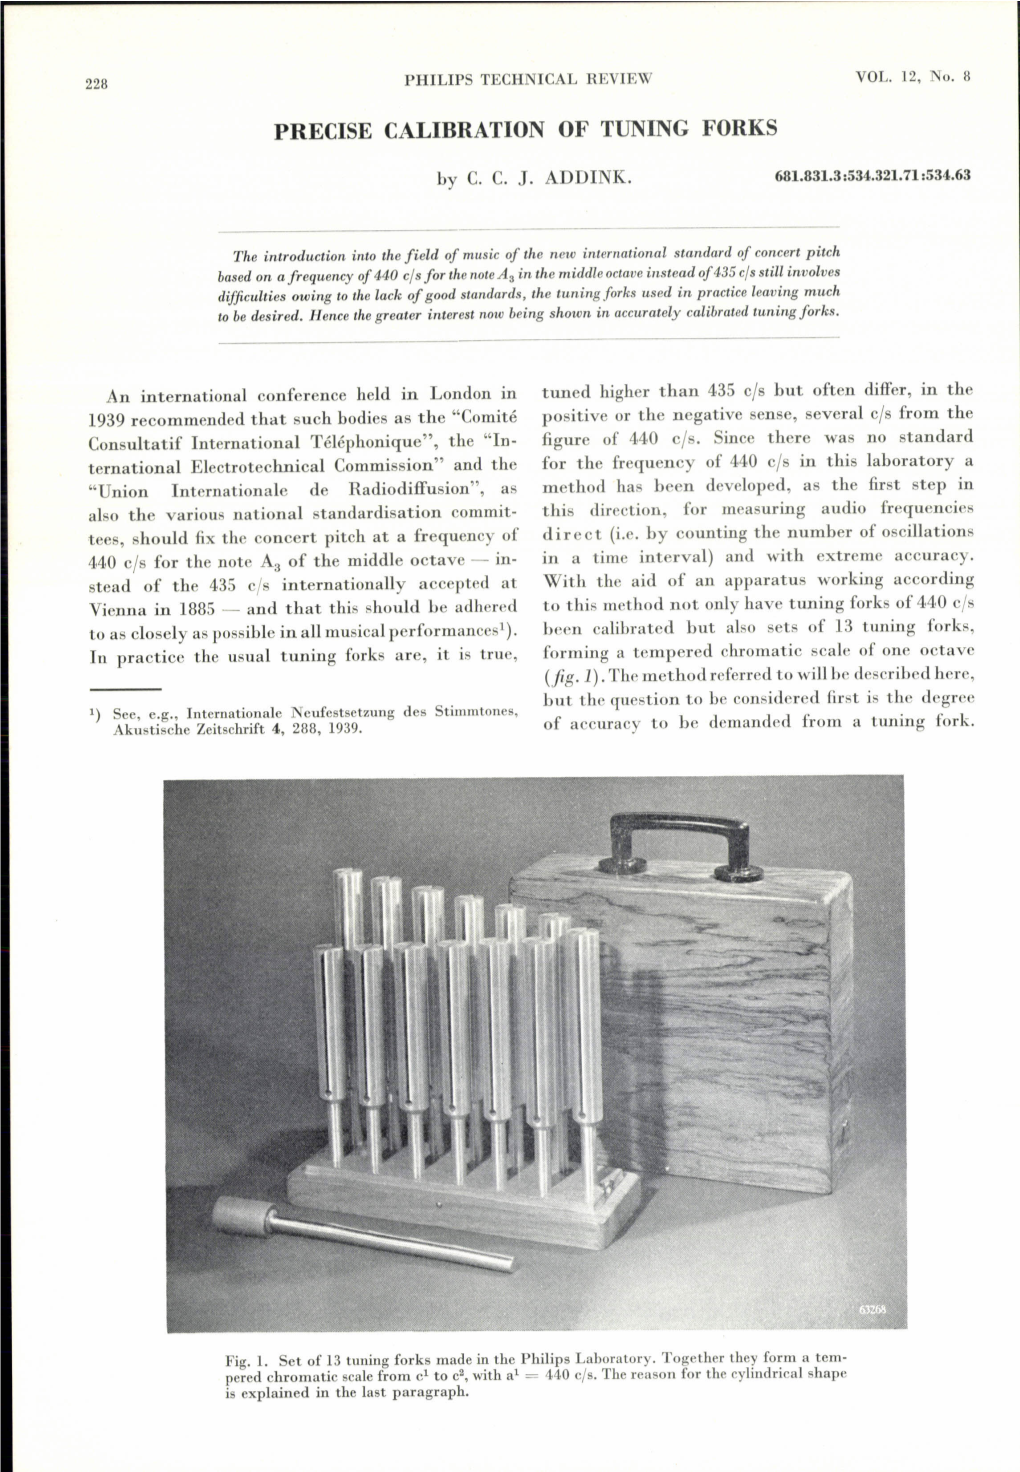 Precise Calibration of Tuning Forks